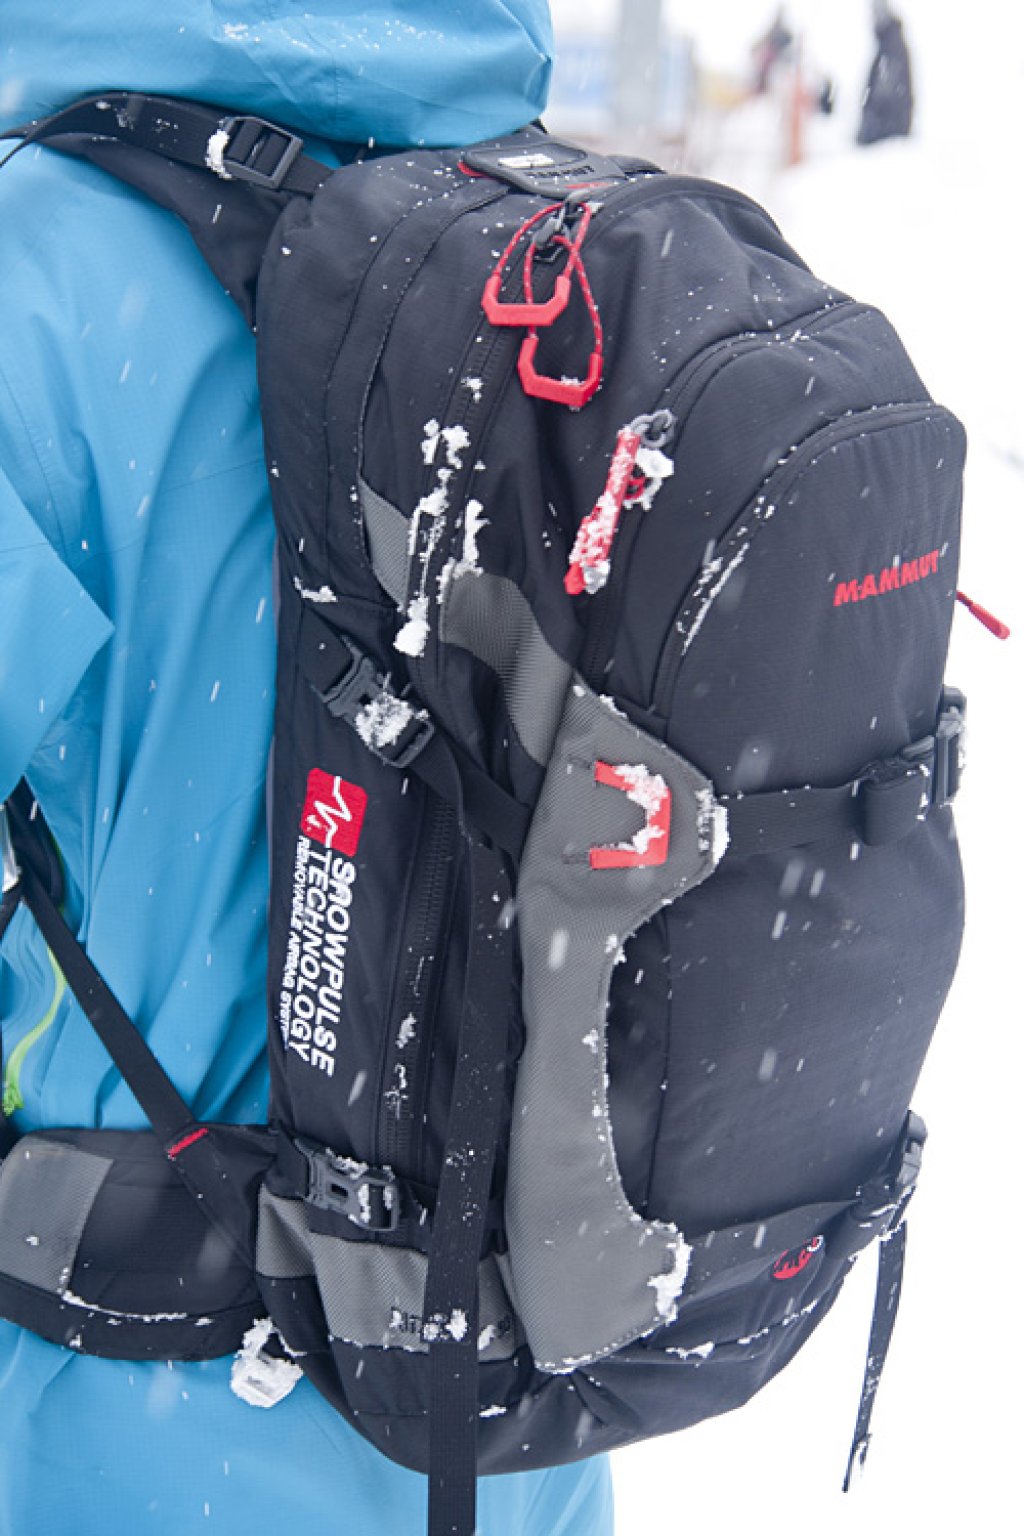 The avalanche airbag backpack with removable airbag system in the freeride practical test